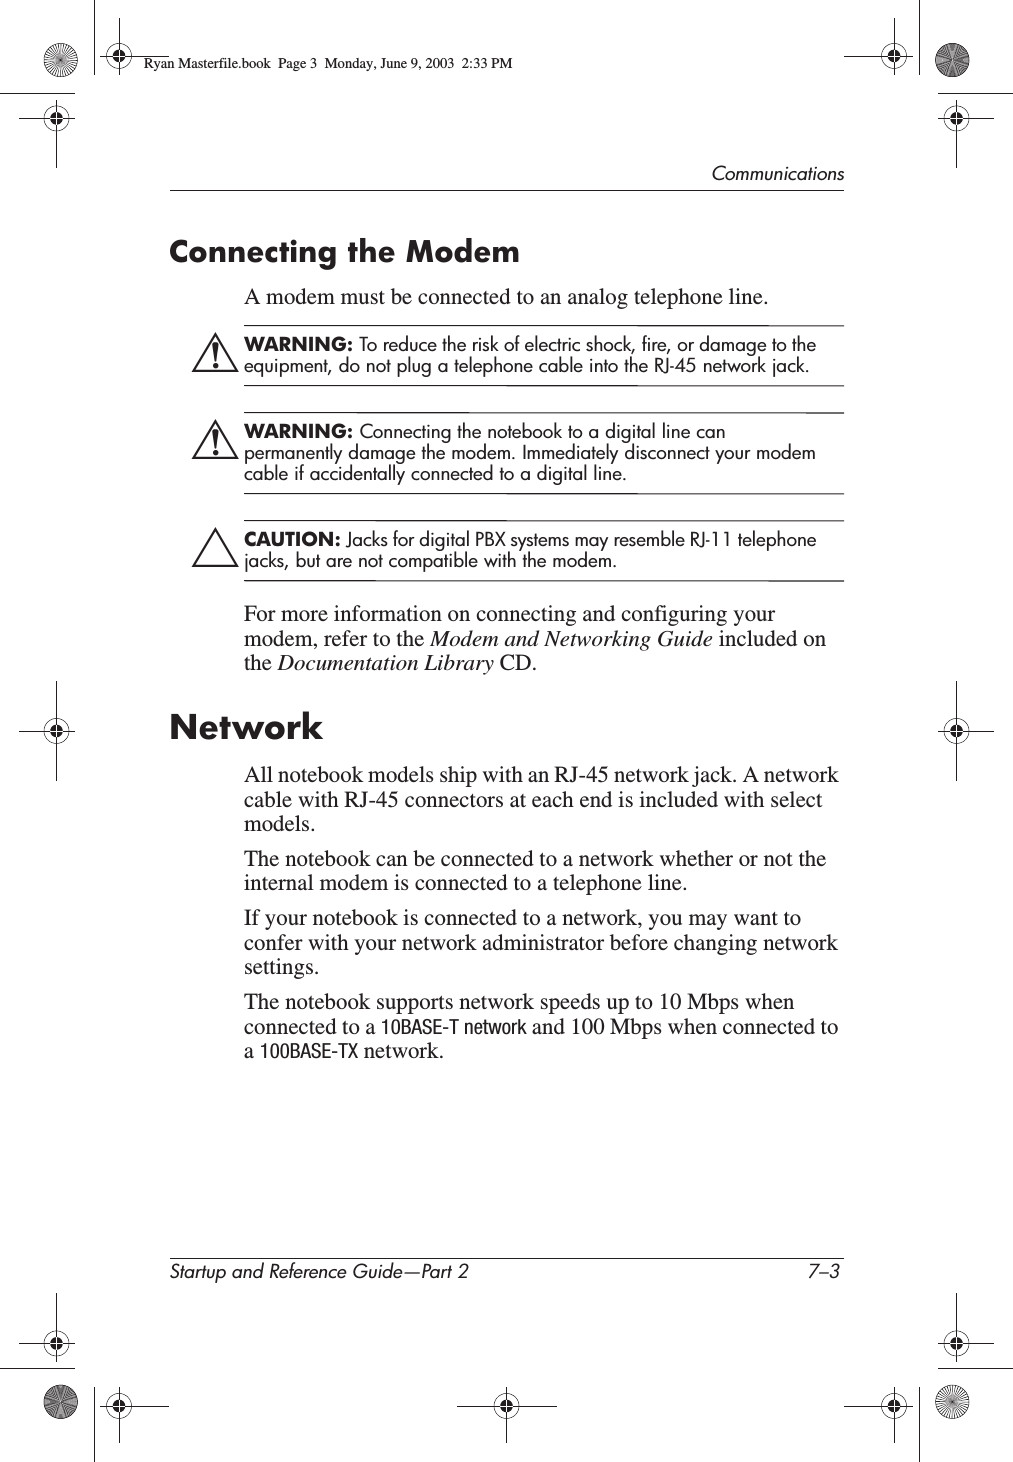 CommunicationsStartup and Reference Guide—Part 2 7–3Connecting the ModemA modem must be connected to an analog telephone line.ÅWARNING: To reduce the risk of electric shock, fire, or damage to the equipment, do not plug a telephone cable into the RJ-45 network jack.ÅWARNING: Connecting the notebook to a digital line can permanently damage the modem. Immediately disconnect your modem cable if accidentally connected to a digital line.ÄCAUTION: Jacks for digital PBX systems may resemble RJ-11 telephone jacks, but are not compatible with the modem.For more information on connecting and configuring your modem, refer to the Modem and Networking Guide included on the Documentation Library CD.NetworkAll notebook models ship with an RJ-45 network jack. A network cable with RJ-45 connectors at each end is included with select models.The notebook can be connected to a network whether or not the internal modem is connected to a telephone line.If your notebook is connected to a network, you may want to confer with your network administrator before changing network settings.The notebook supports network speeds up to 10 Mbps when connected to a 10BASE-T network and 100 Mbps when connected to a100BASE-TX network.Ryan Masterfile.book  Page 3  Monday, June 9, 2003  2:33 PM